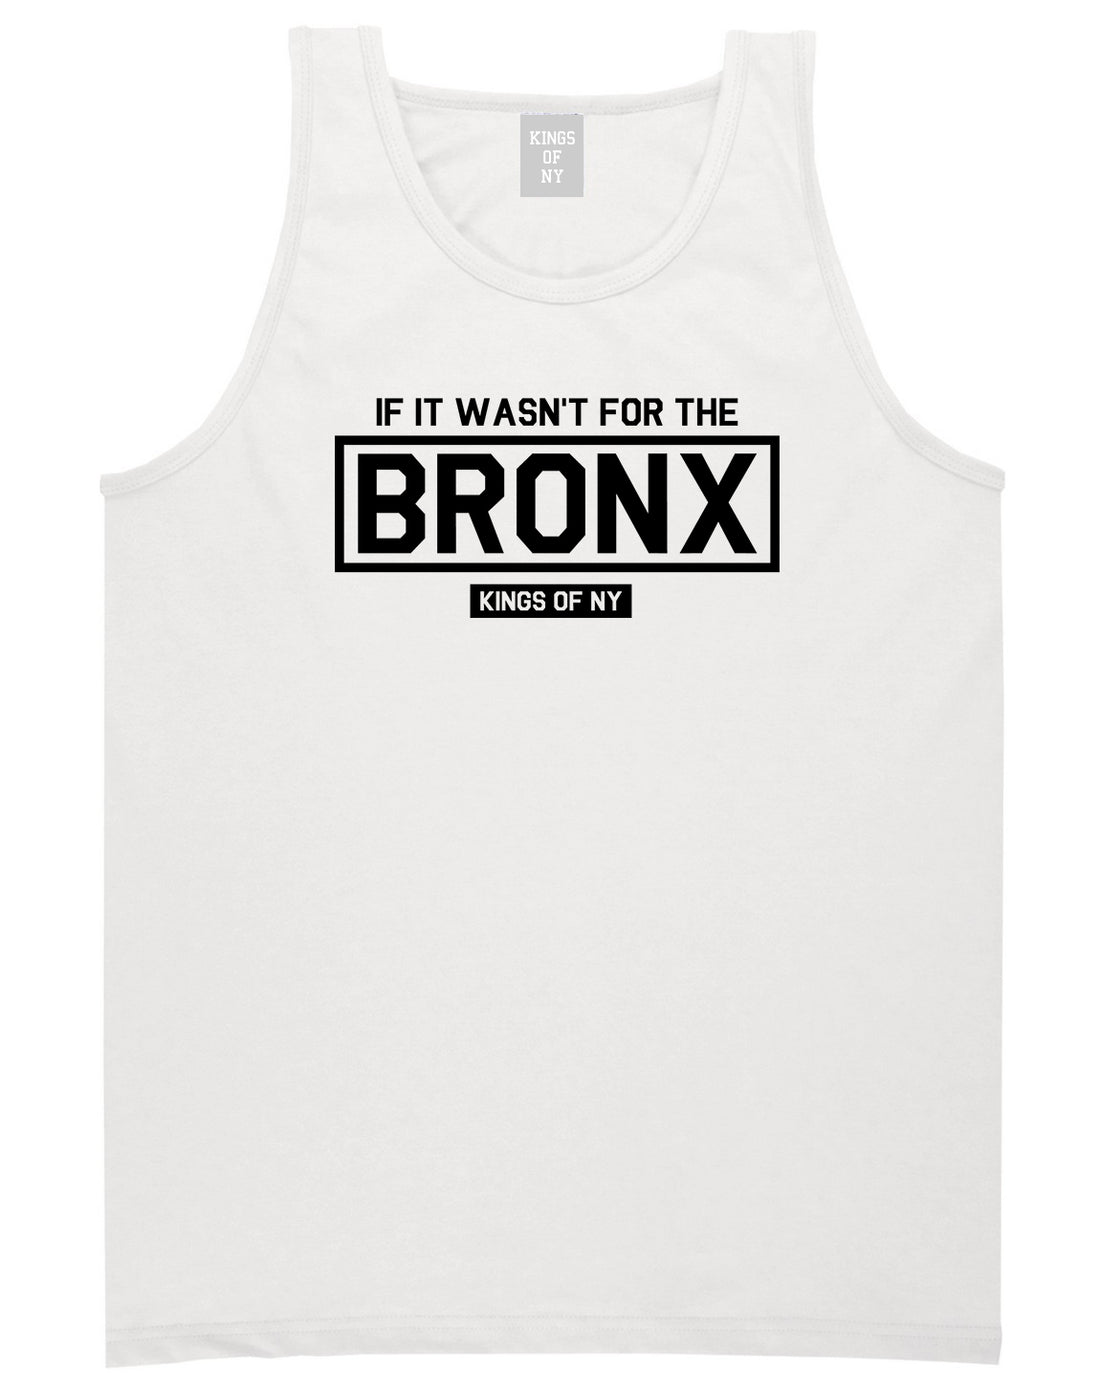 If It Wasnt For The Bronx Mens Tank Top Shirt White by Kings Of NY